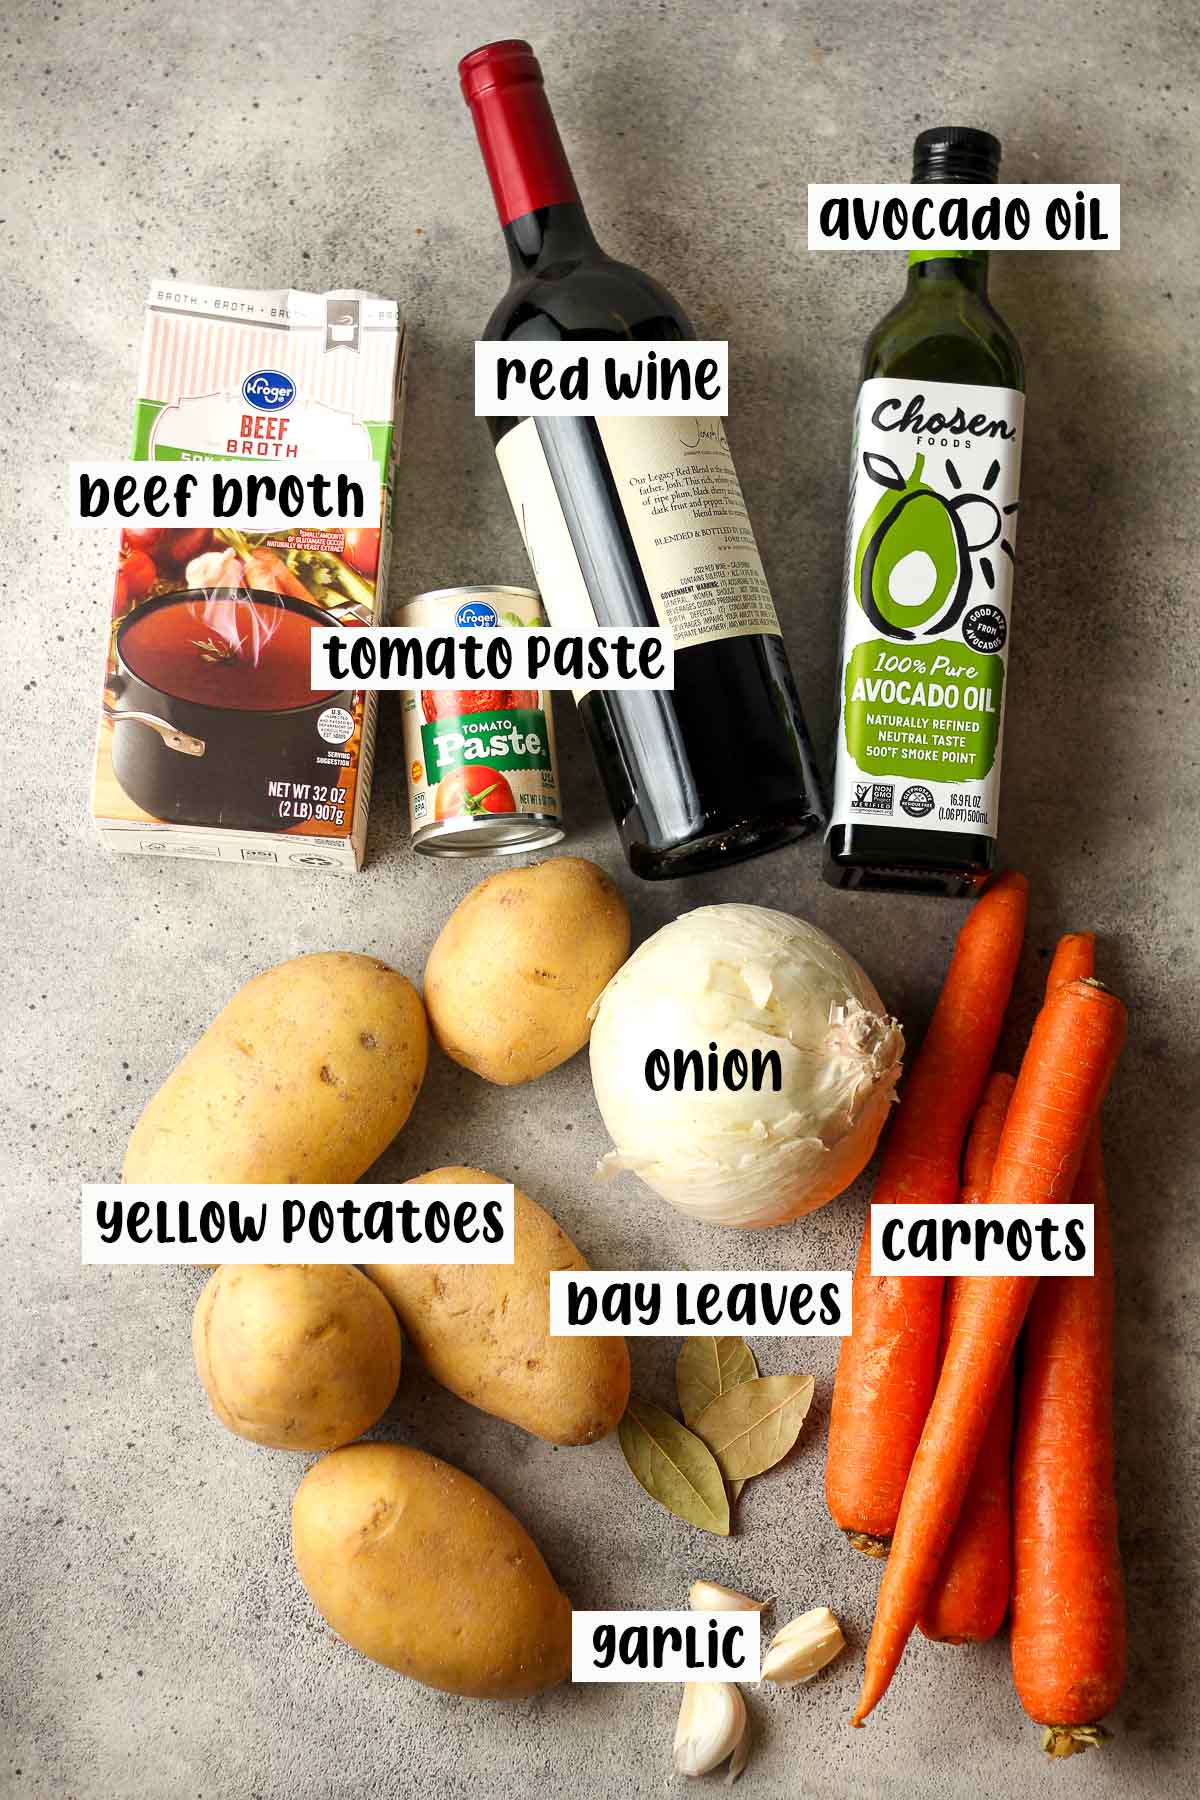 The labeled ingredients for the additions to the roast.